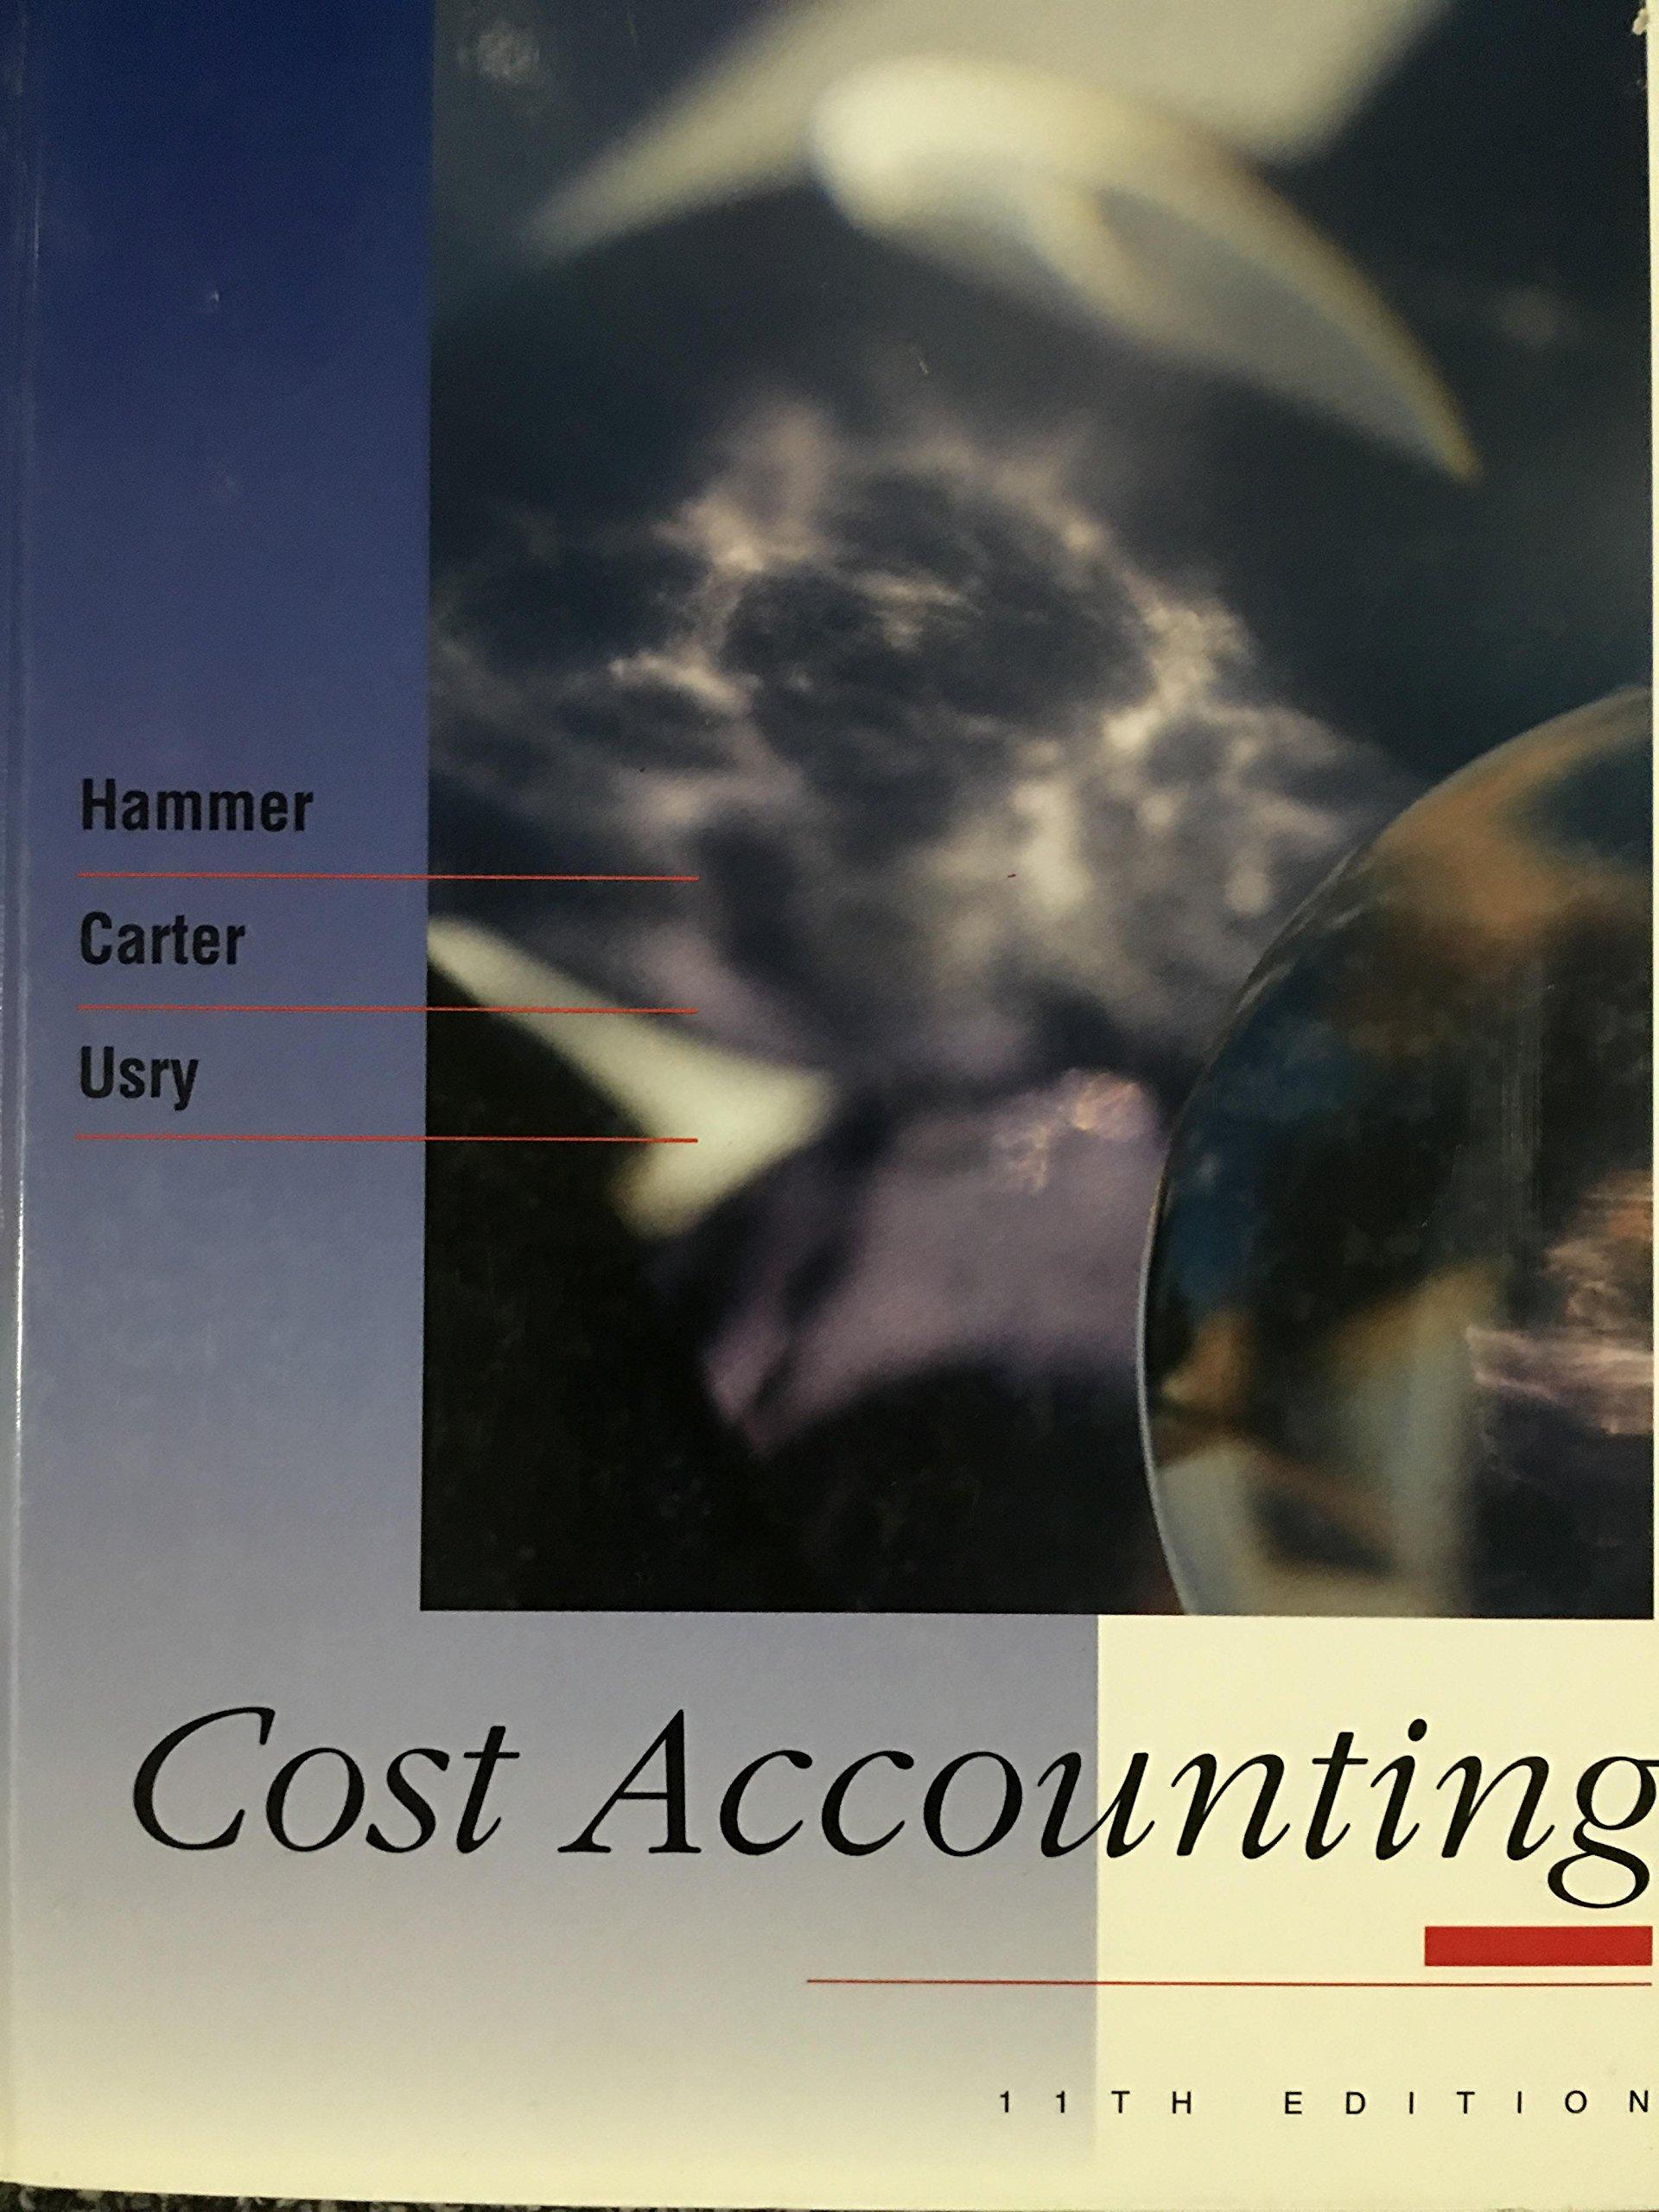 cost accounting 11th edition lawrence h. hammer, william k. carter, milton f. usry 0538828072, 9780538828079